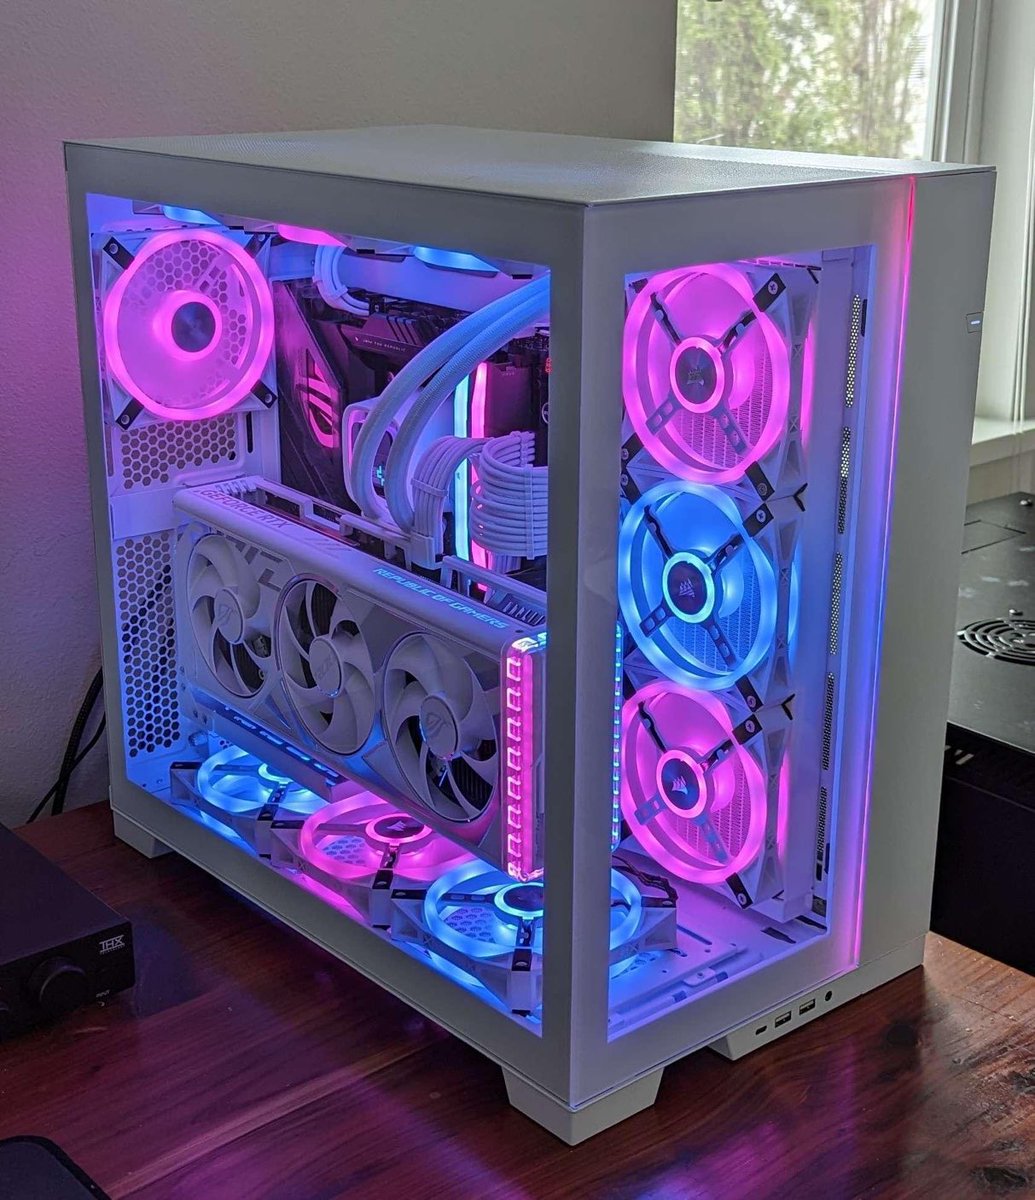 We are giving away a #gamingpc with an rtx4090 to a lucky winner!

Follow +♻️+❤️+Comment and 💜💜

Ends in 4 days!

#pcgiveaway #pcgaming #pcsetup #gaming #pc #giveaway #pcbuild #pccase #setupwarriors #republicofgamers #setupwars #gamingpc #setupsforgaming #rtx #pcsetups #pcgamer